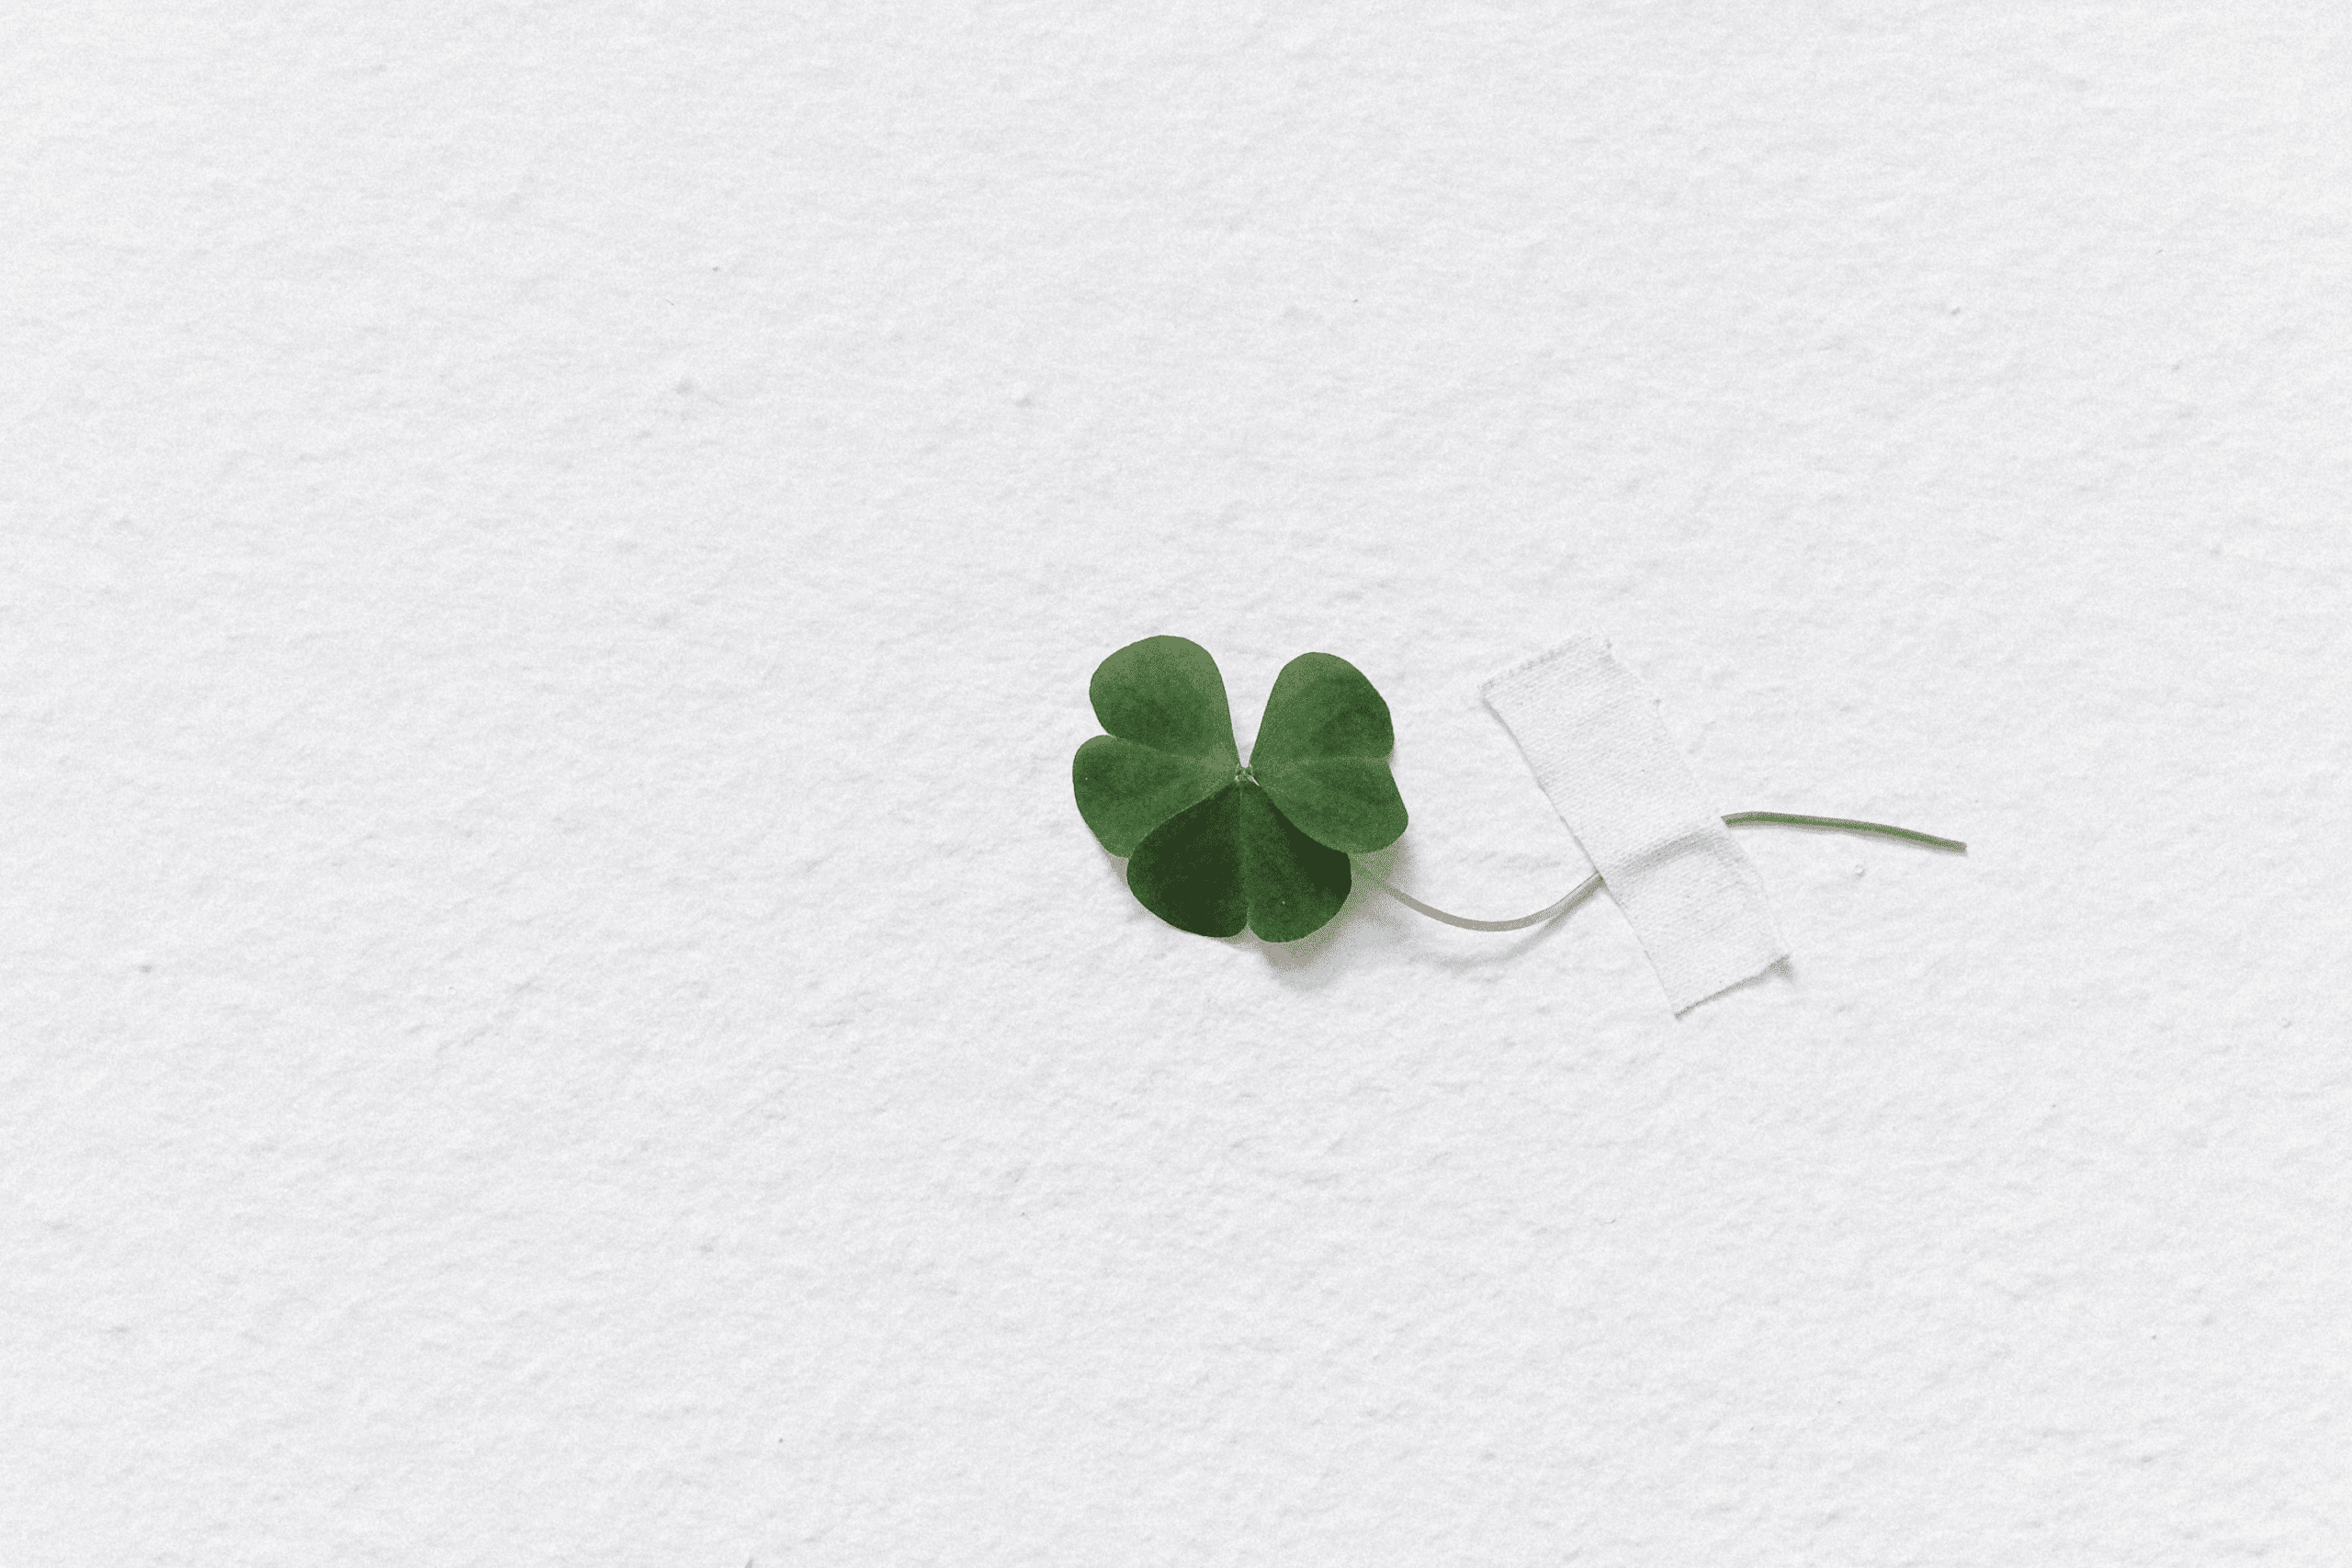 Shamrock taped to a white piece of paper